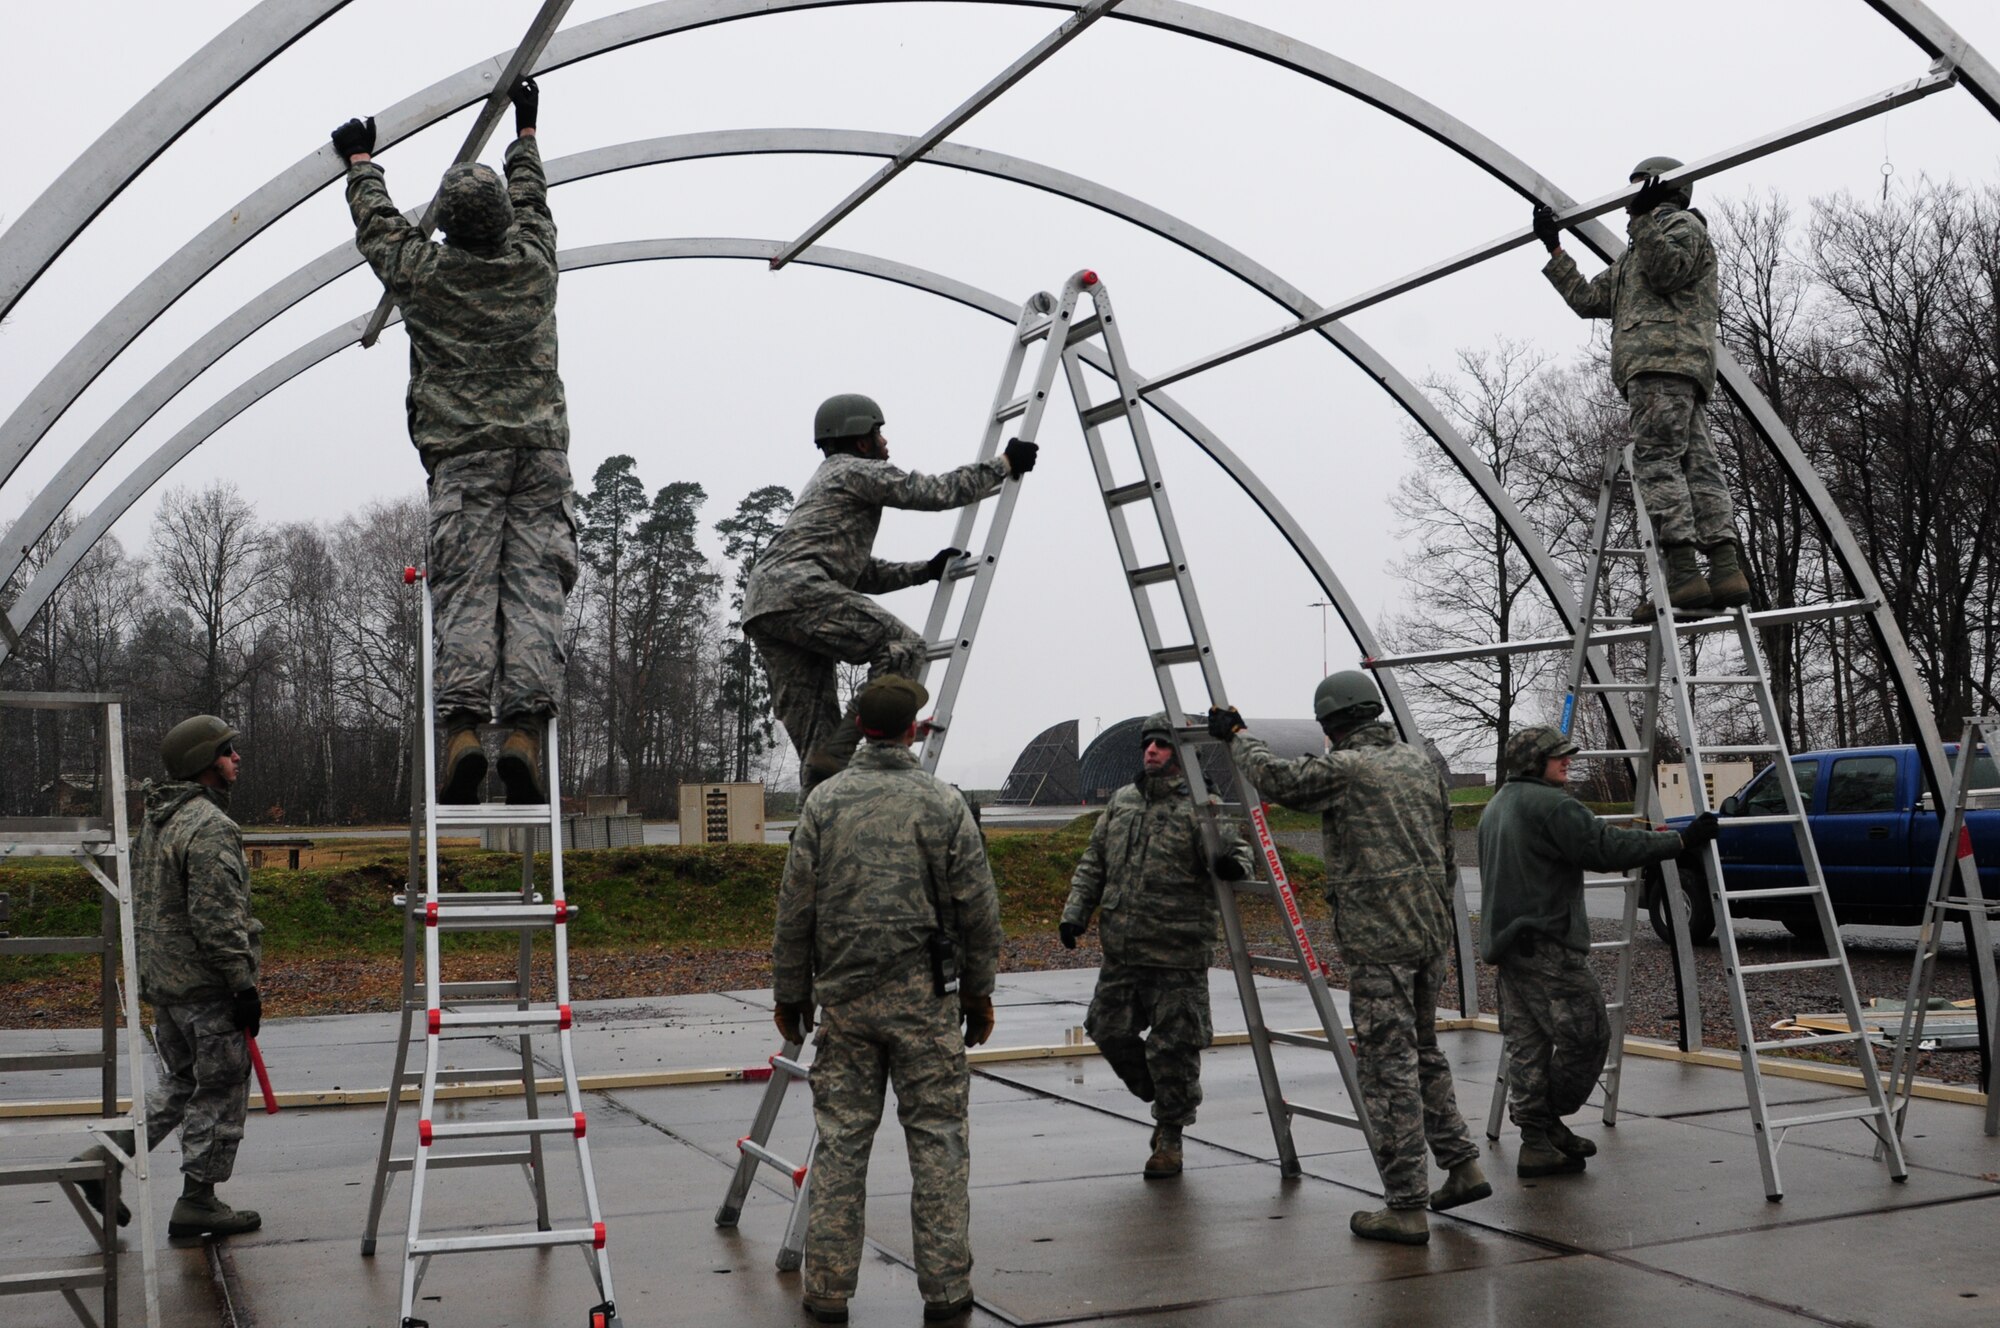 Civil engineer structures specialists build a large tent on the field training exercise area at Ramstein Air Base, Germany during Silver Flag training, March 7, 2016. Silver Flag participants utilized the tent as a dining facility during the bare base deployment training exercise. (U.S. Air National Guard photo/ Senior Airman Erica Rodriguez)